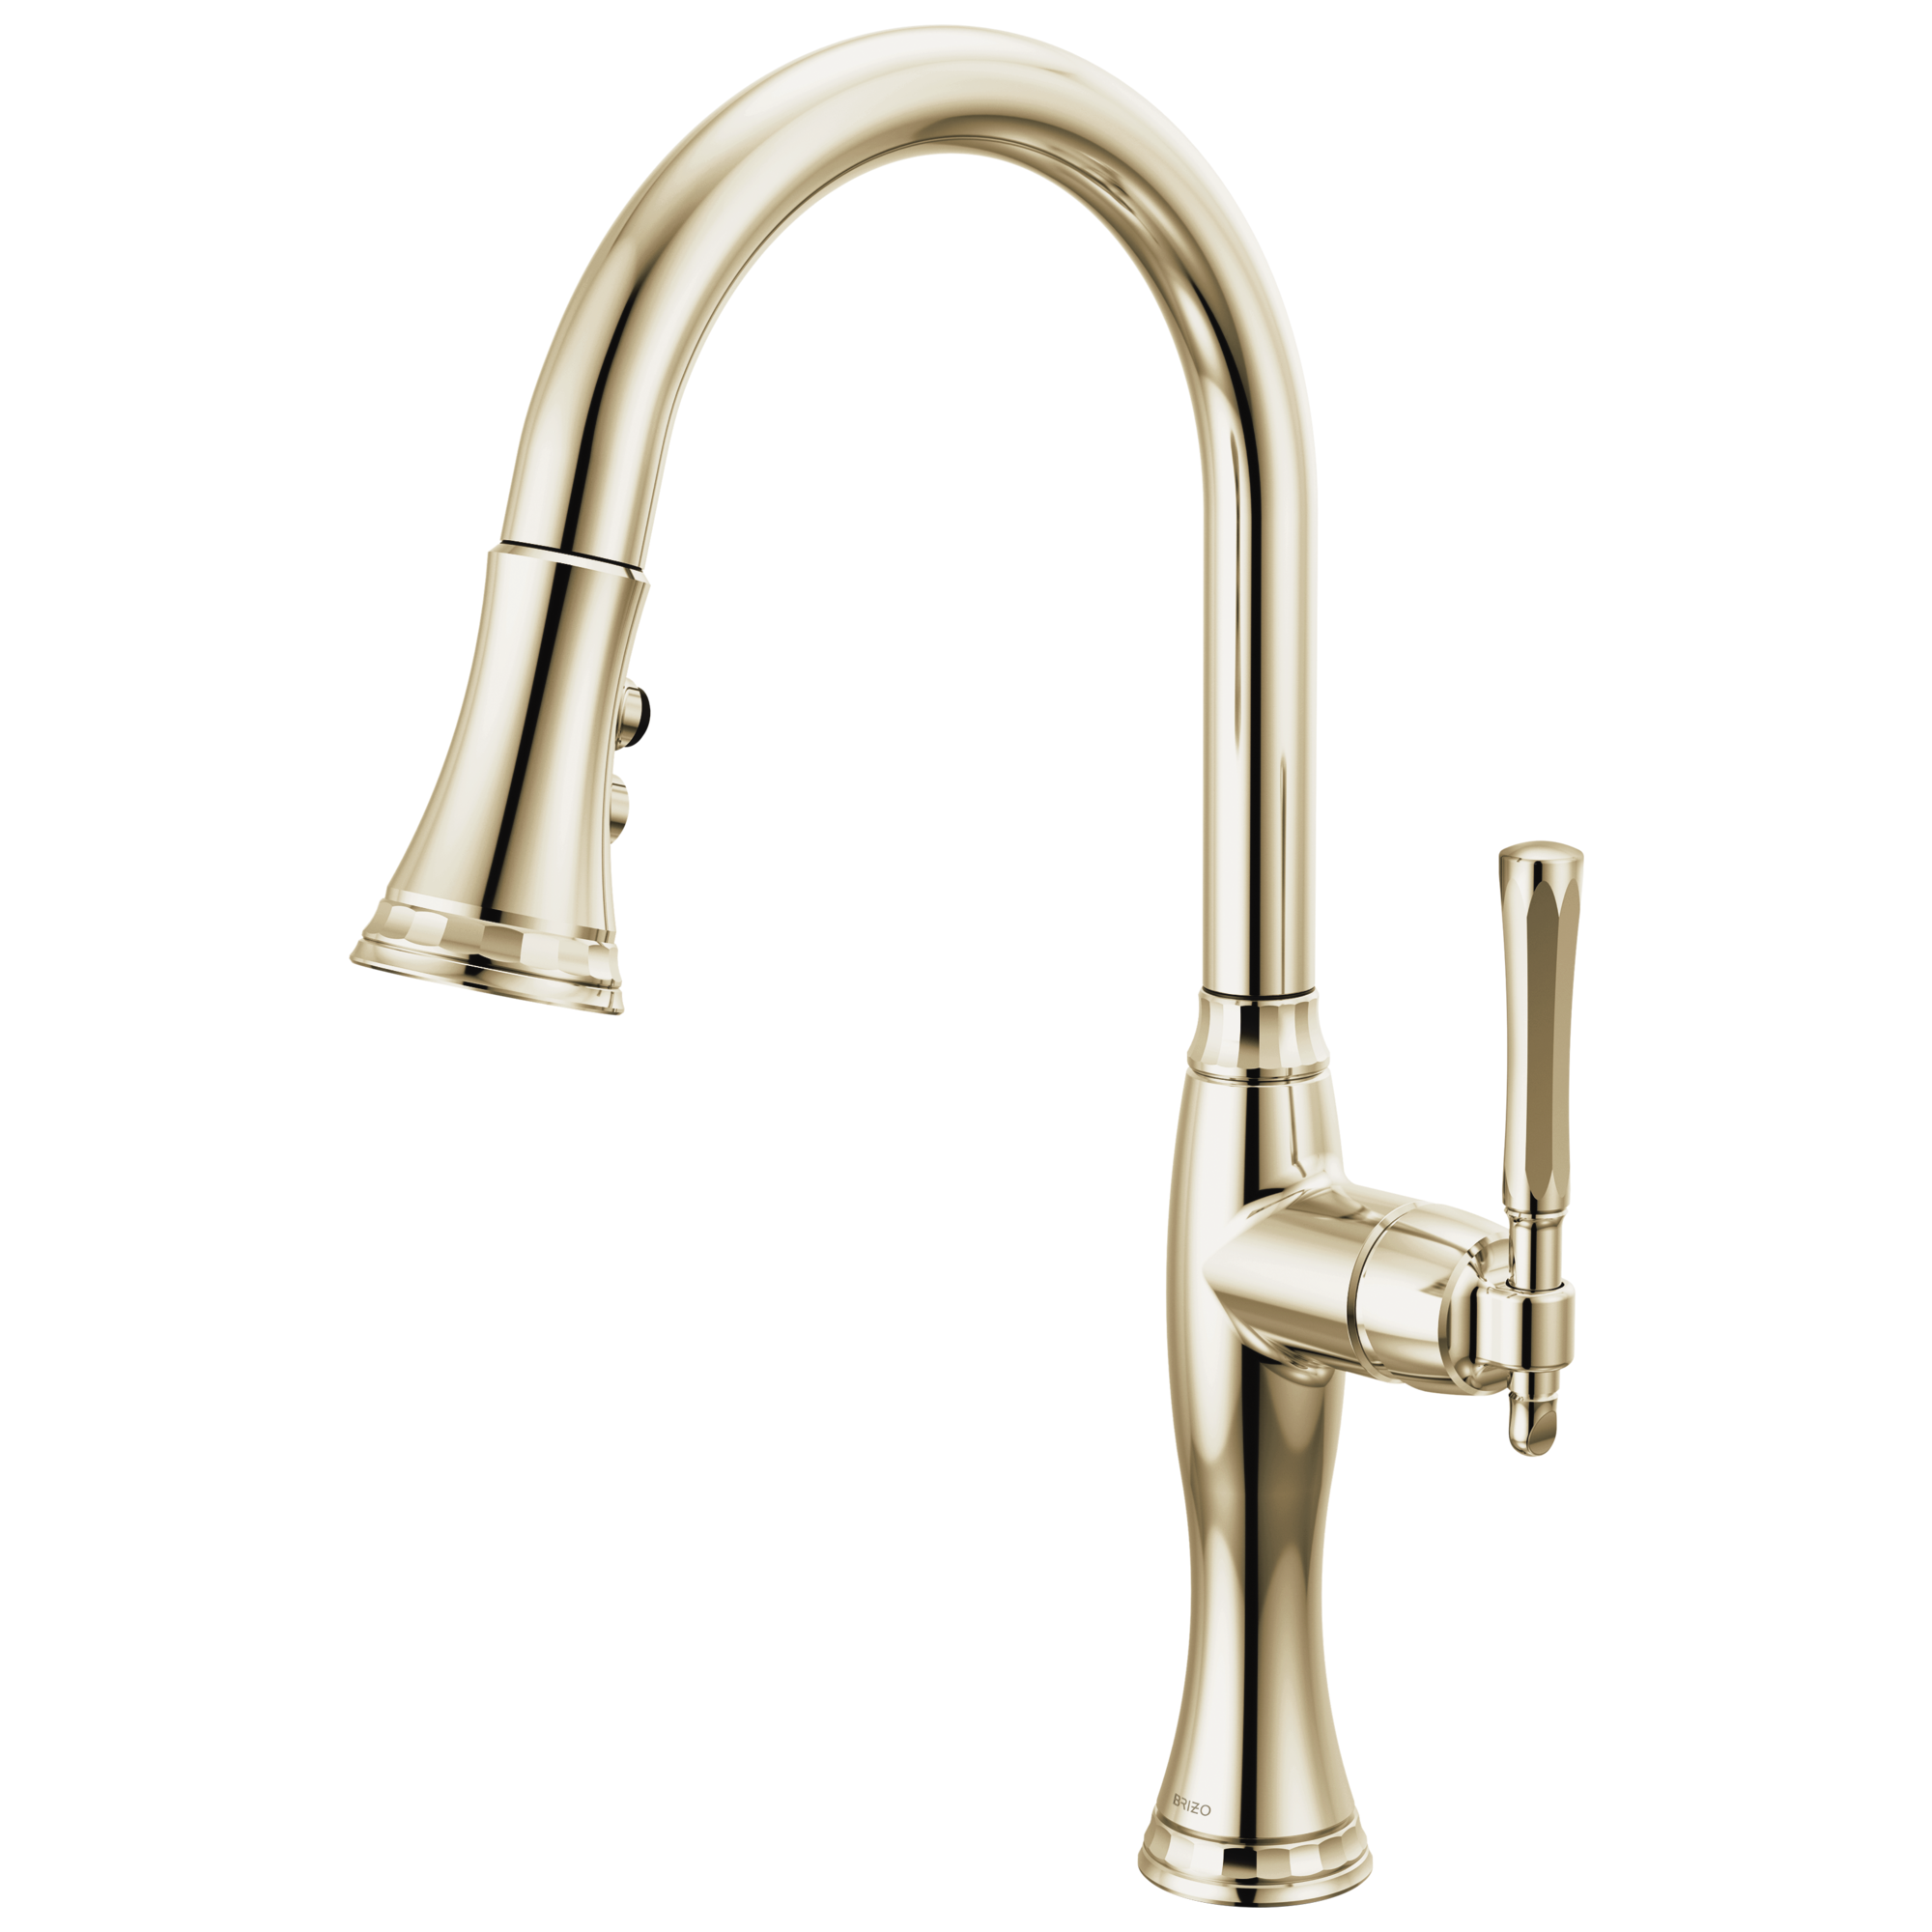 Brizo The Tulham Kitchen Collection by Brizo Pull-Down Kitchen Faucet